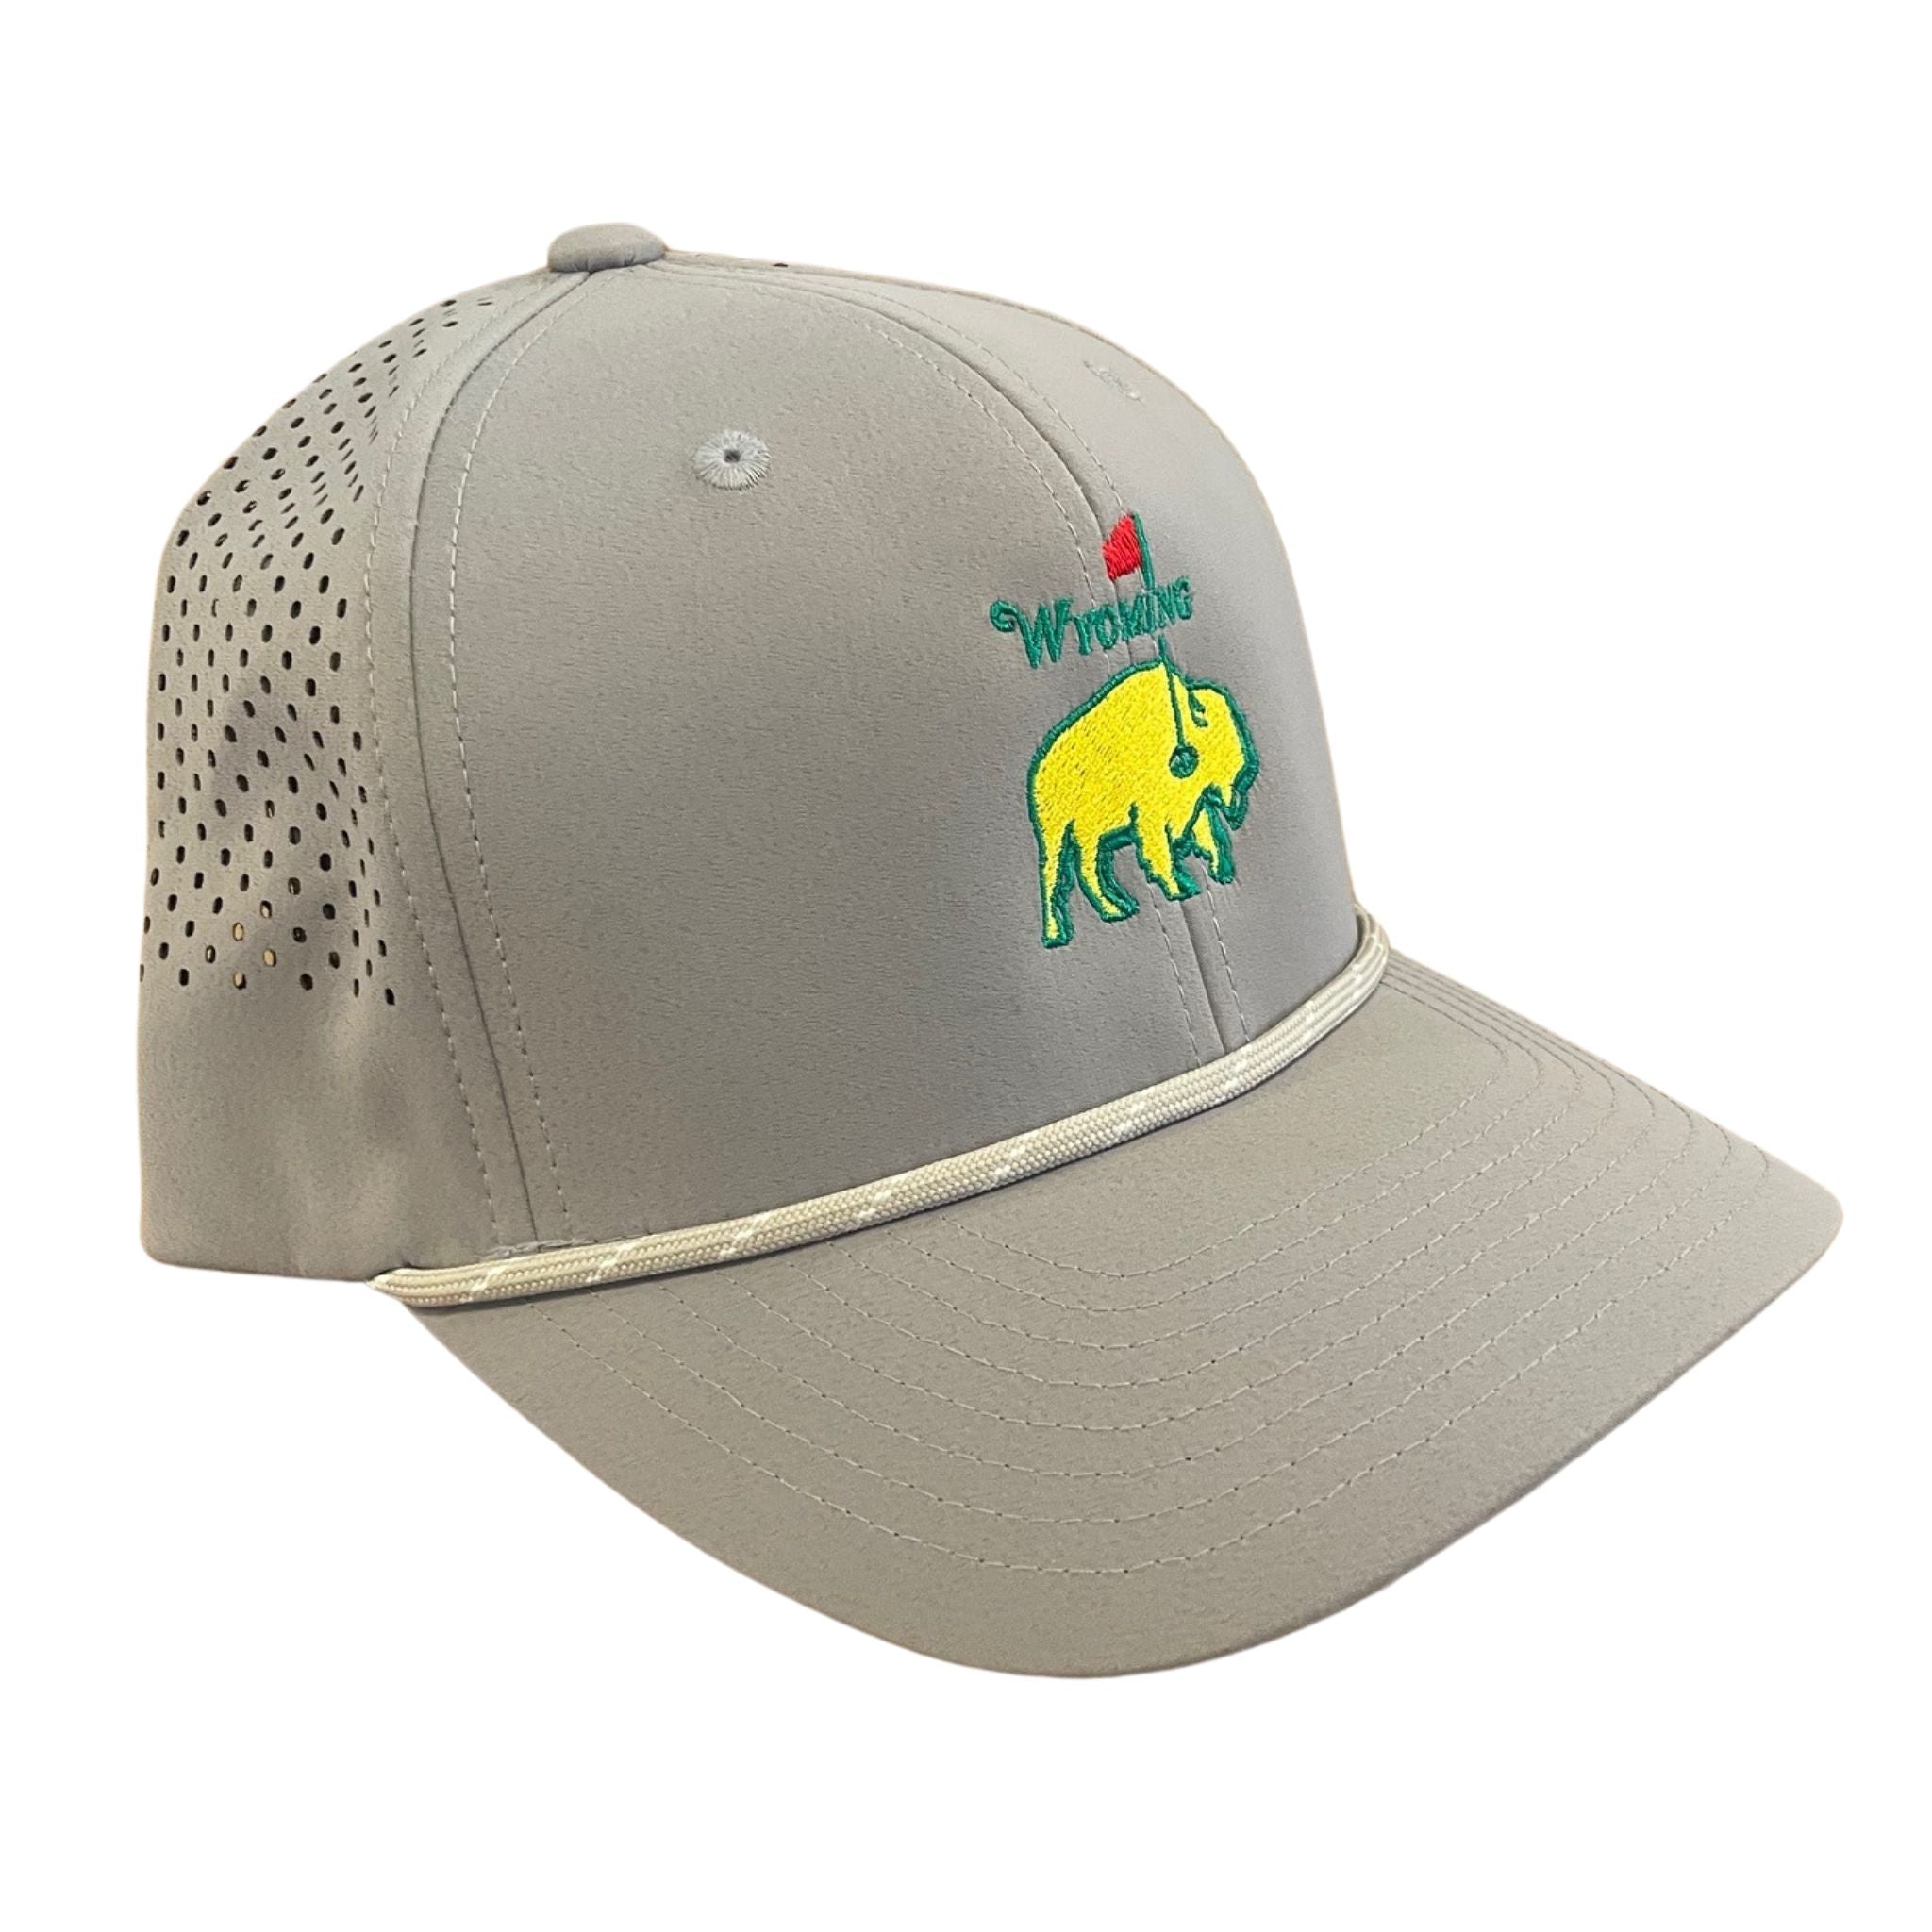 Grey rope hat with the wyoming Master's logo